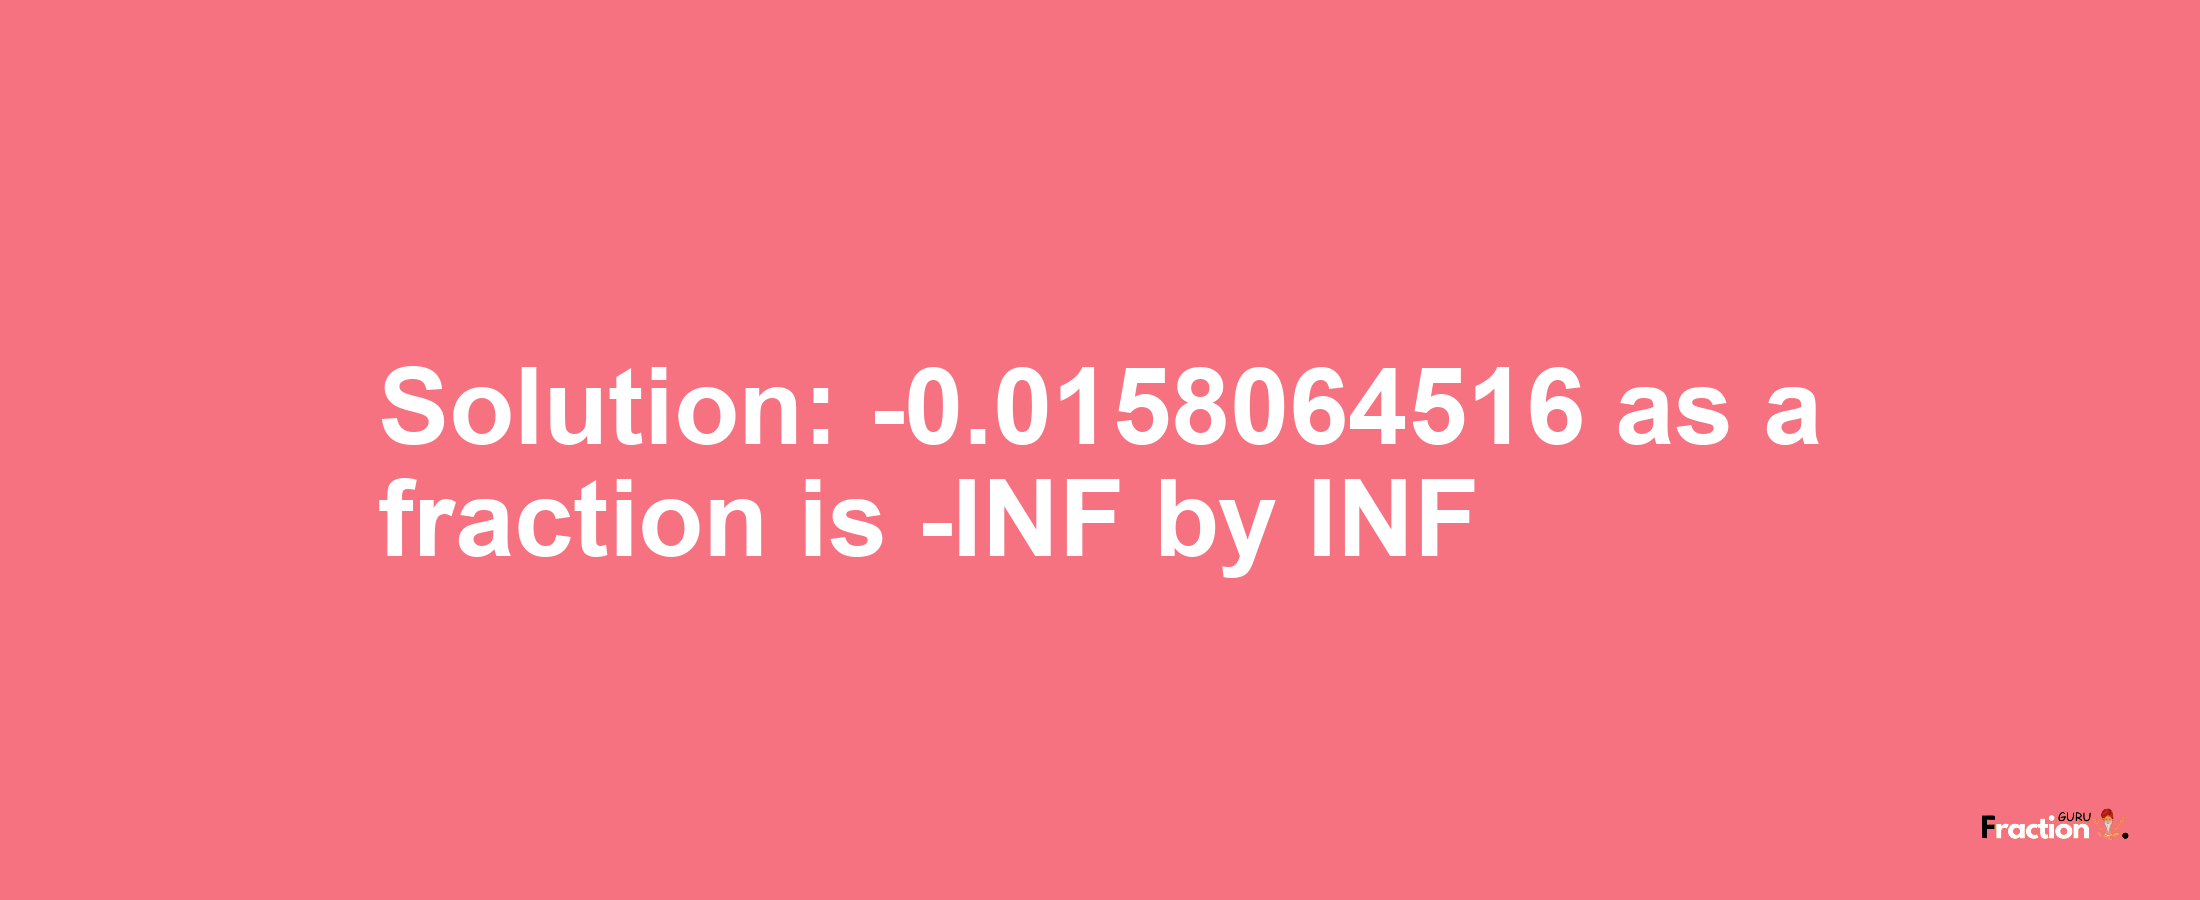 Solution:-0.0158064516 as a fraction is -INF/INF